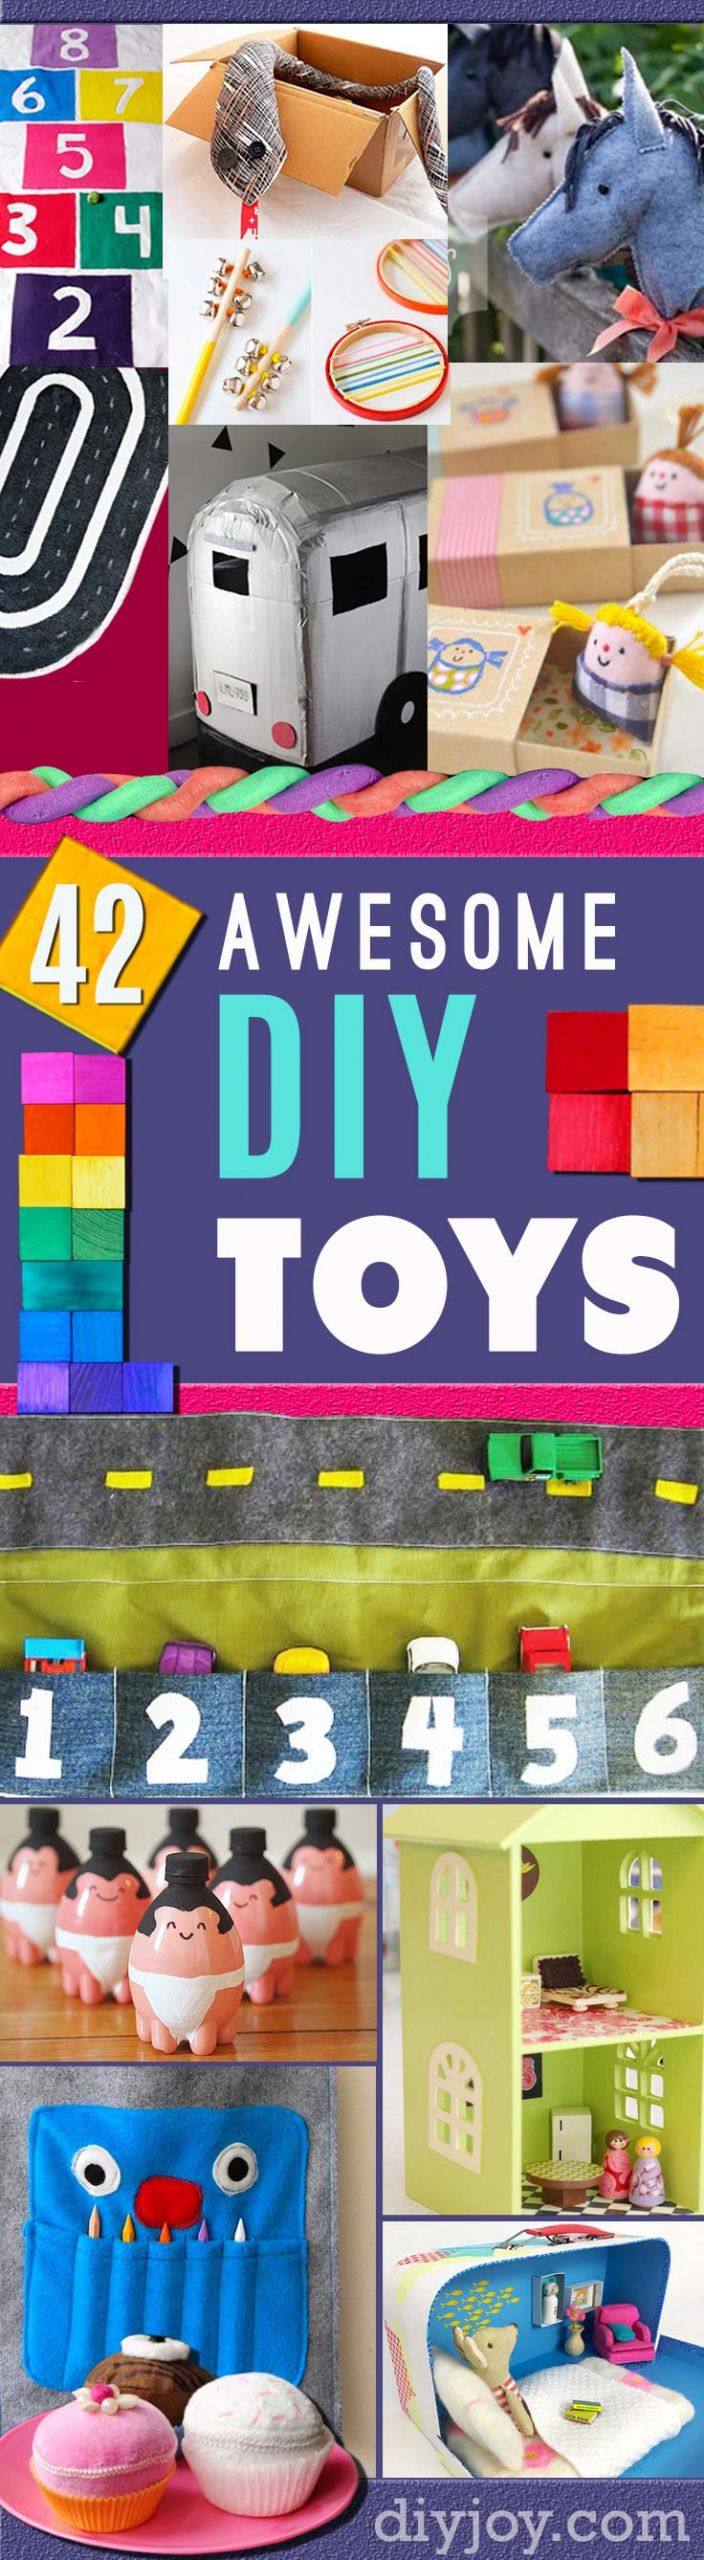 DIY Presents For Kids
 41 Fun DIY Gifts to Make For Kids Perfect Homemade